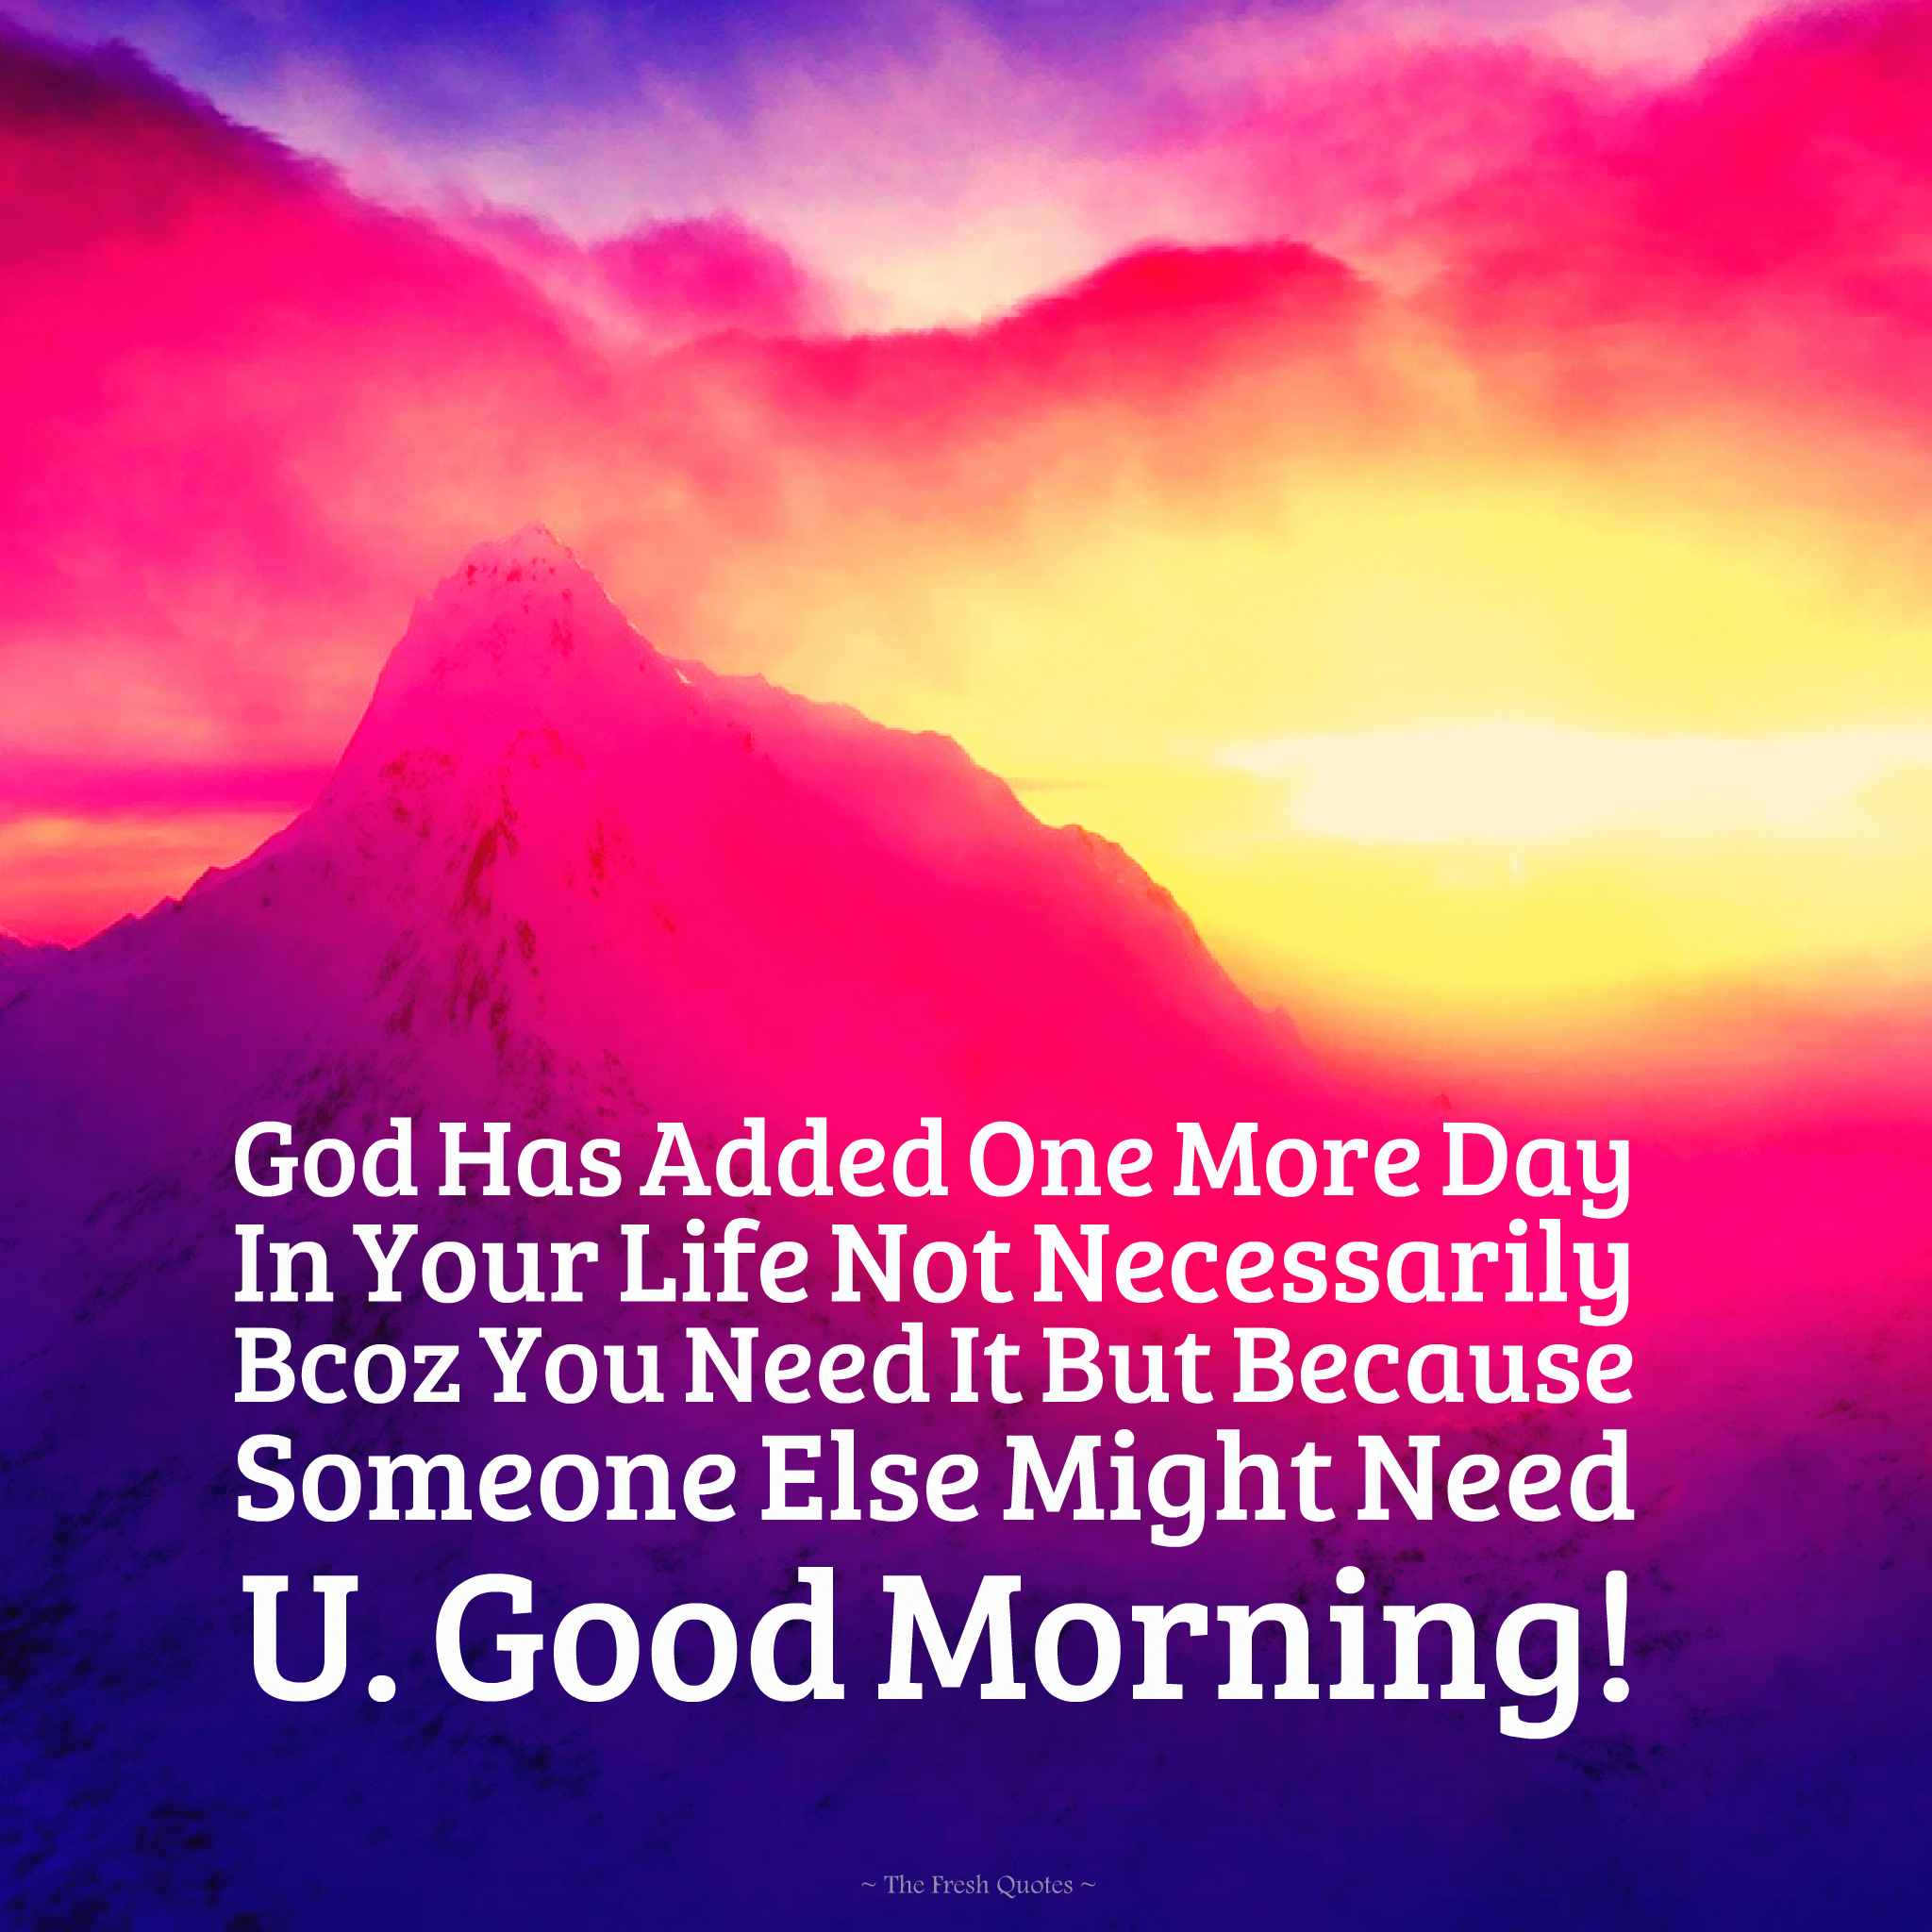 God-Has-Added-One-More-Day-In-Your-Life-Not-Necessarily-Bcoz-You-Need-It-But-Because-Someone-Else-Might-Need-U.-Good-Morning